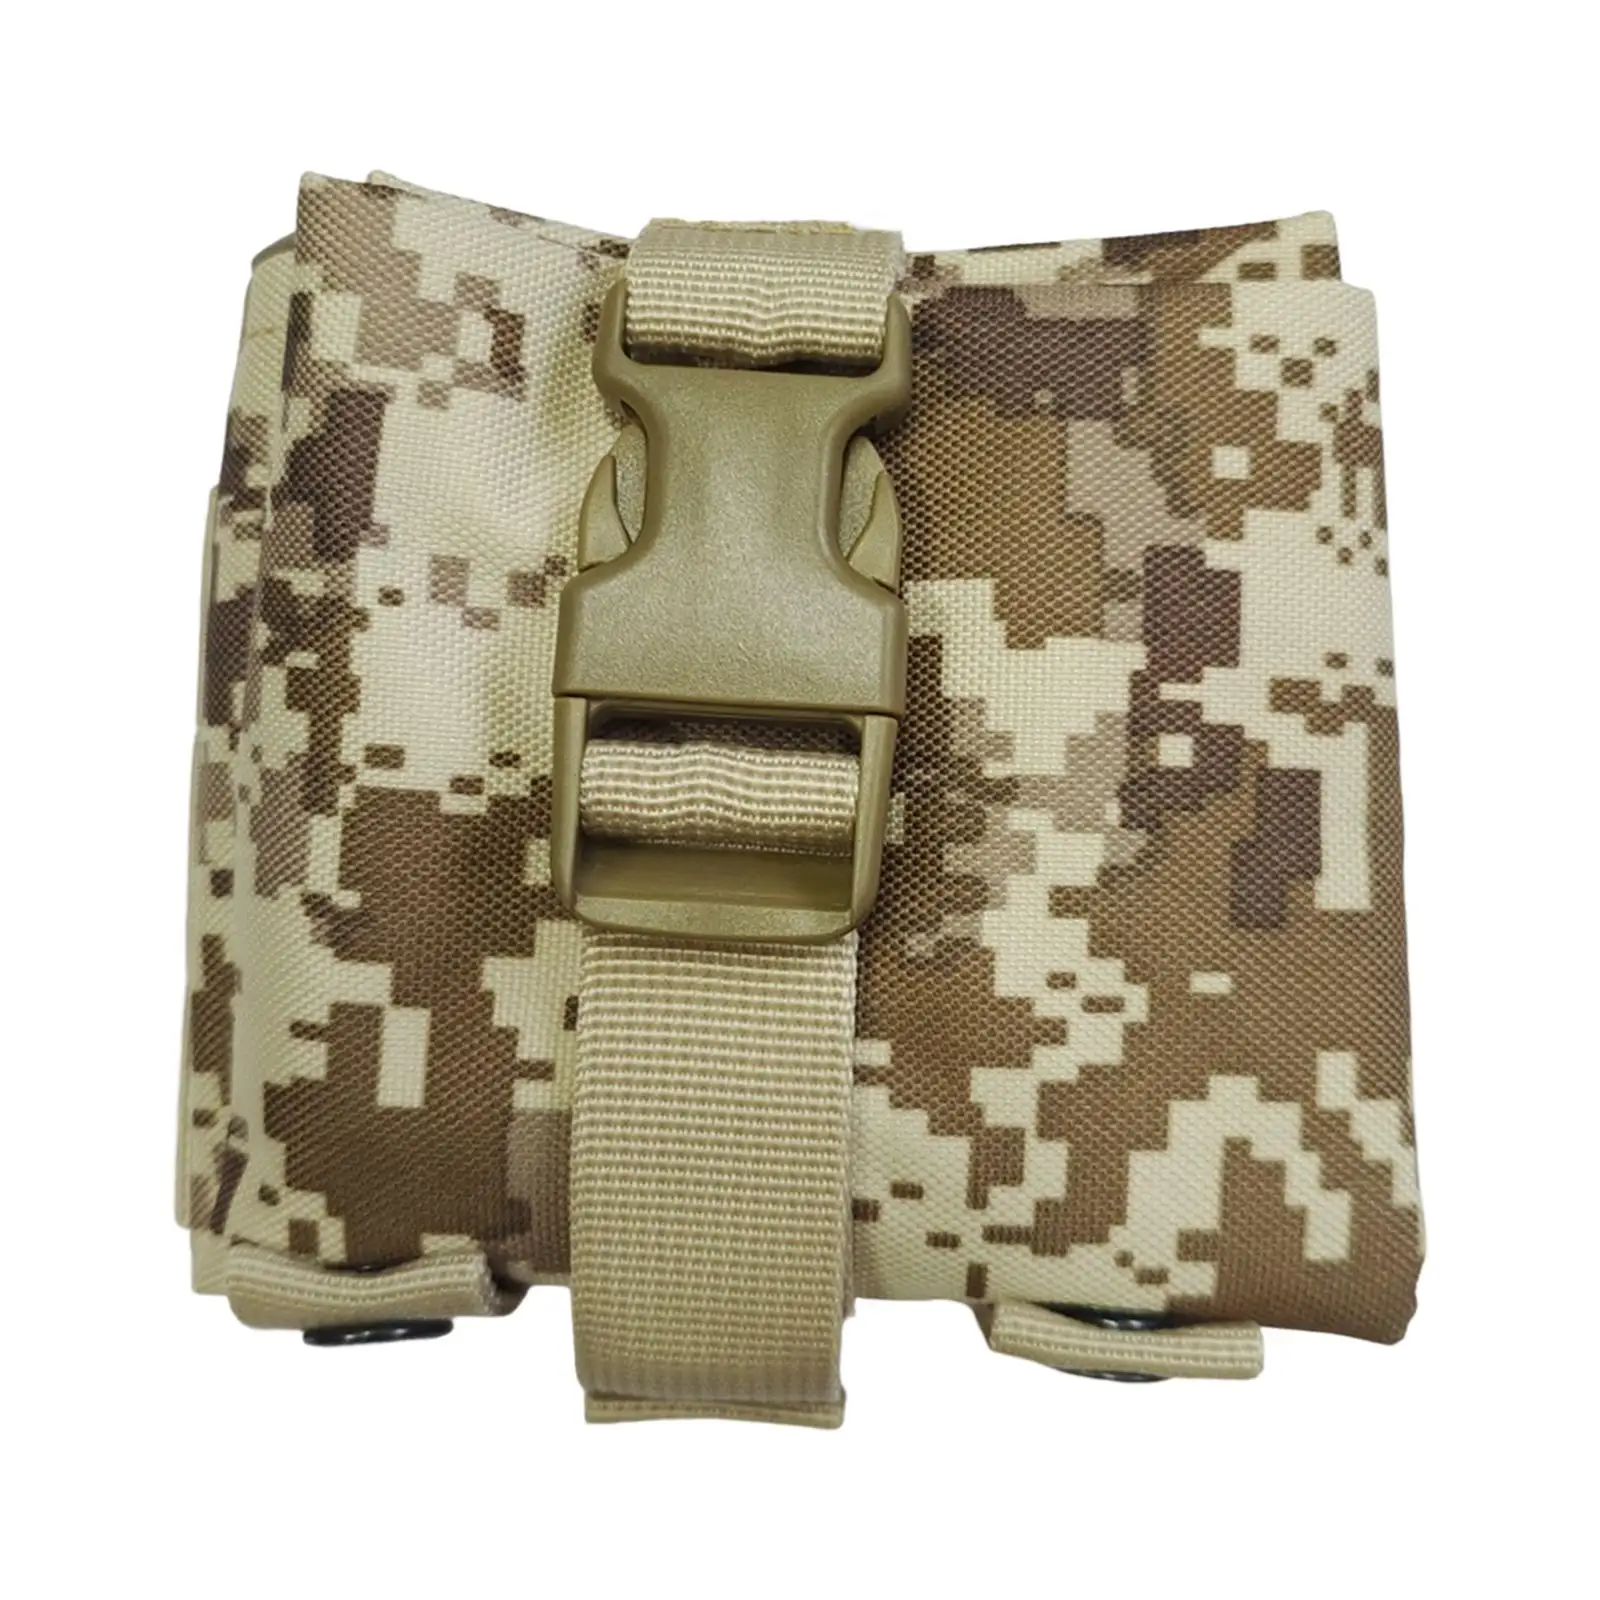 Multipurpose Outdoor Tactical Bag Survival Tool Bag Molle Pouch for Running Hunting Climbing